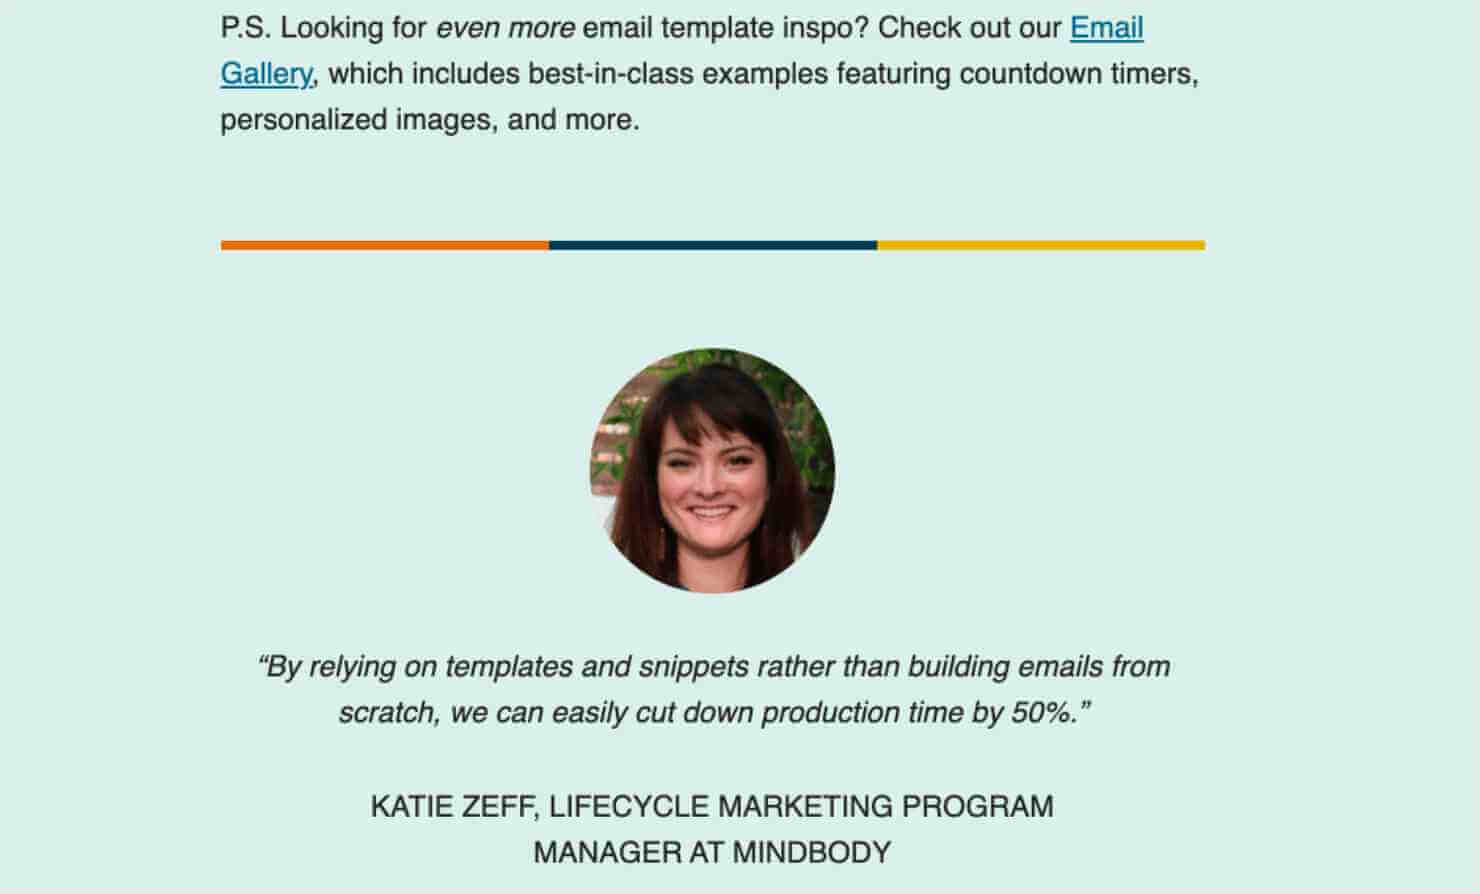 "P.S. Looking for even more email template inspo? Check out our 'Email Gallery,' (linked text) which includes best-in-class examples featuring countdown timers, personalized images, and more." Dividing line. Photo of a woman with a quote: ""By relying on templates and snippets rather than building emails from scratch, we can easily cut down production time bu 50% " KATIE ZEFF, LIFECYCLE MARKETING PROGRAM MANAGER AT MINDBODY"